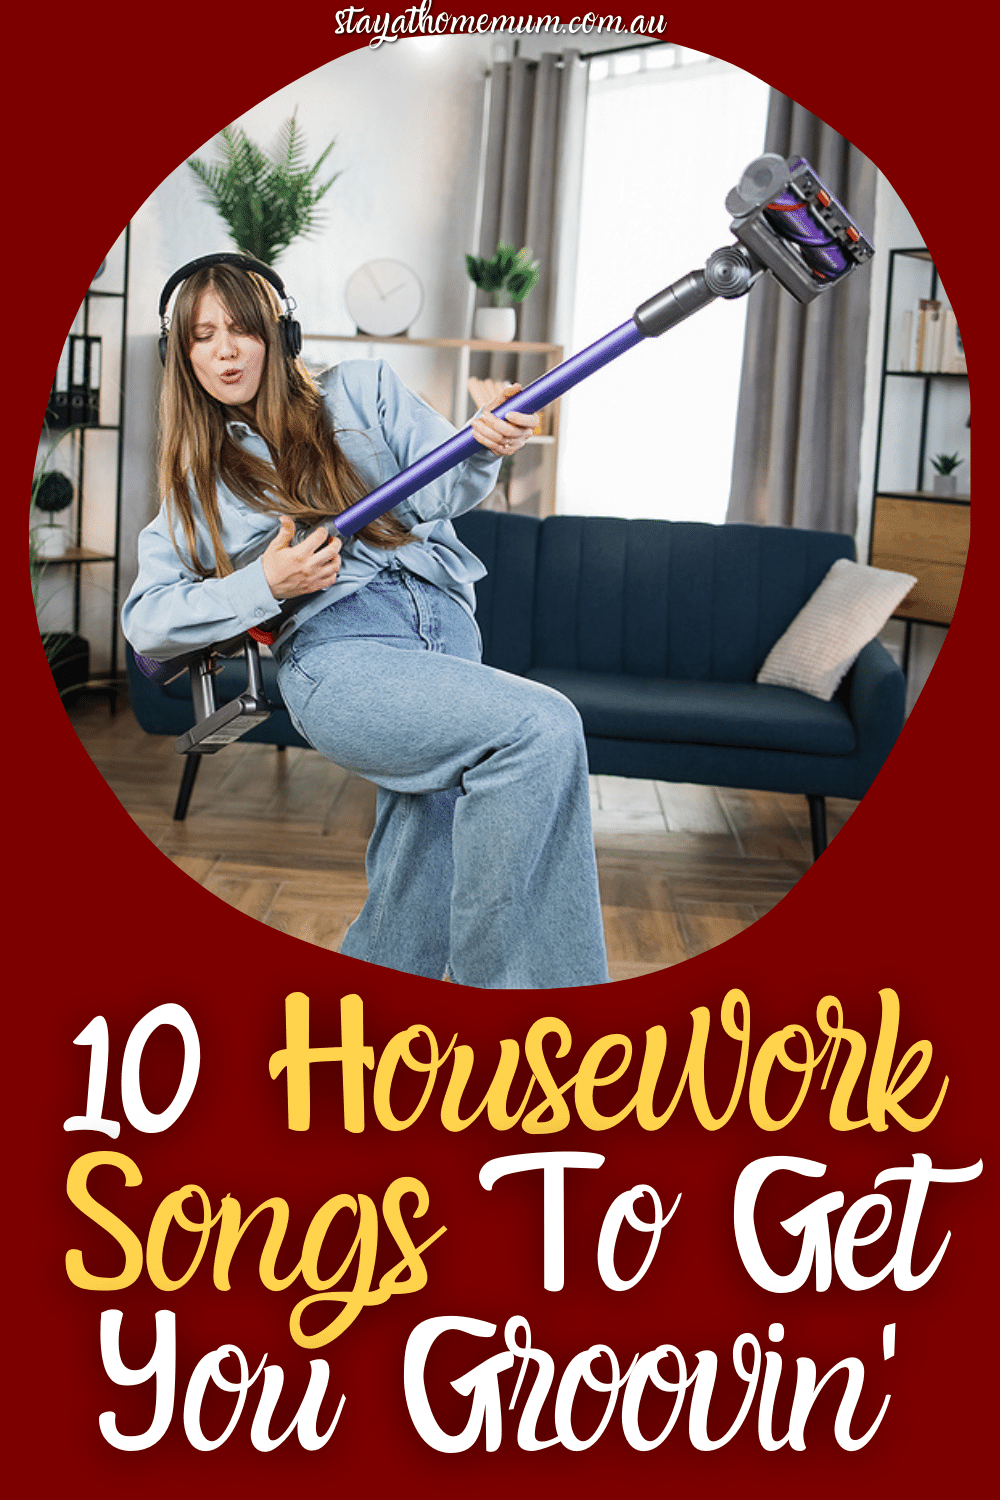 10 Housework Songs To Get You Groovin' | Stay At Home Mum